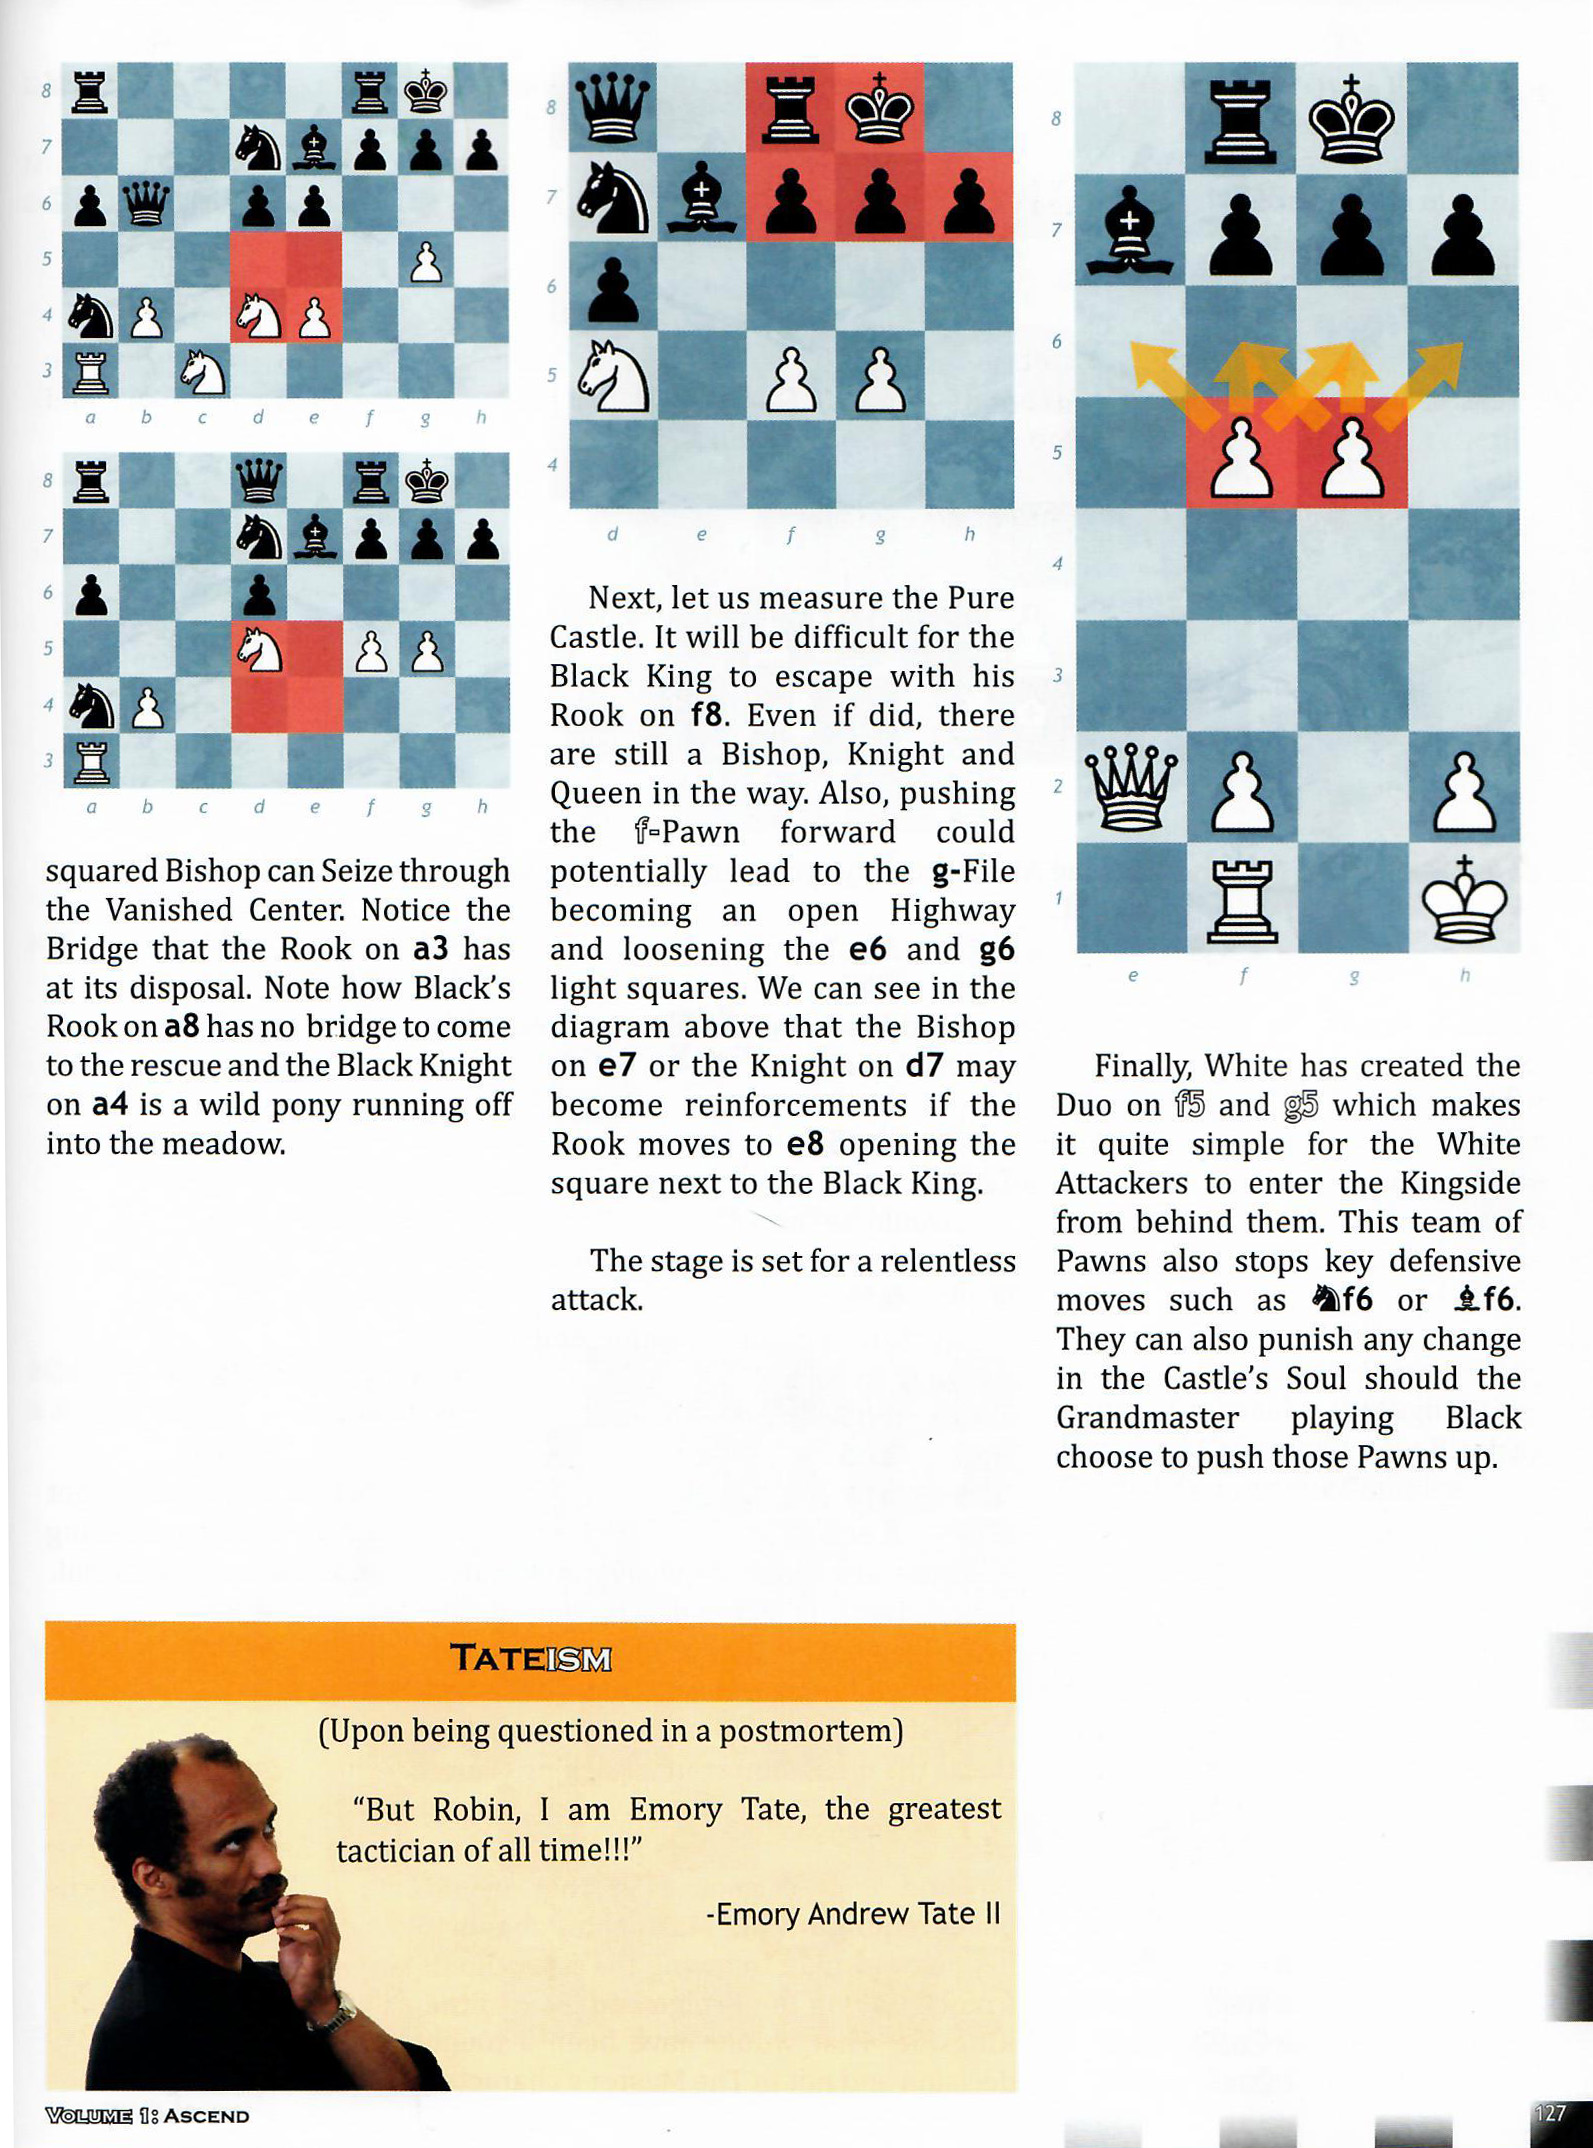 Emory Andrew Tate Jr. – Daily Chess Musings